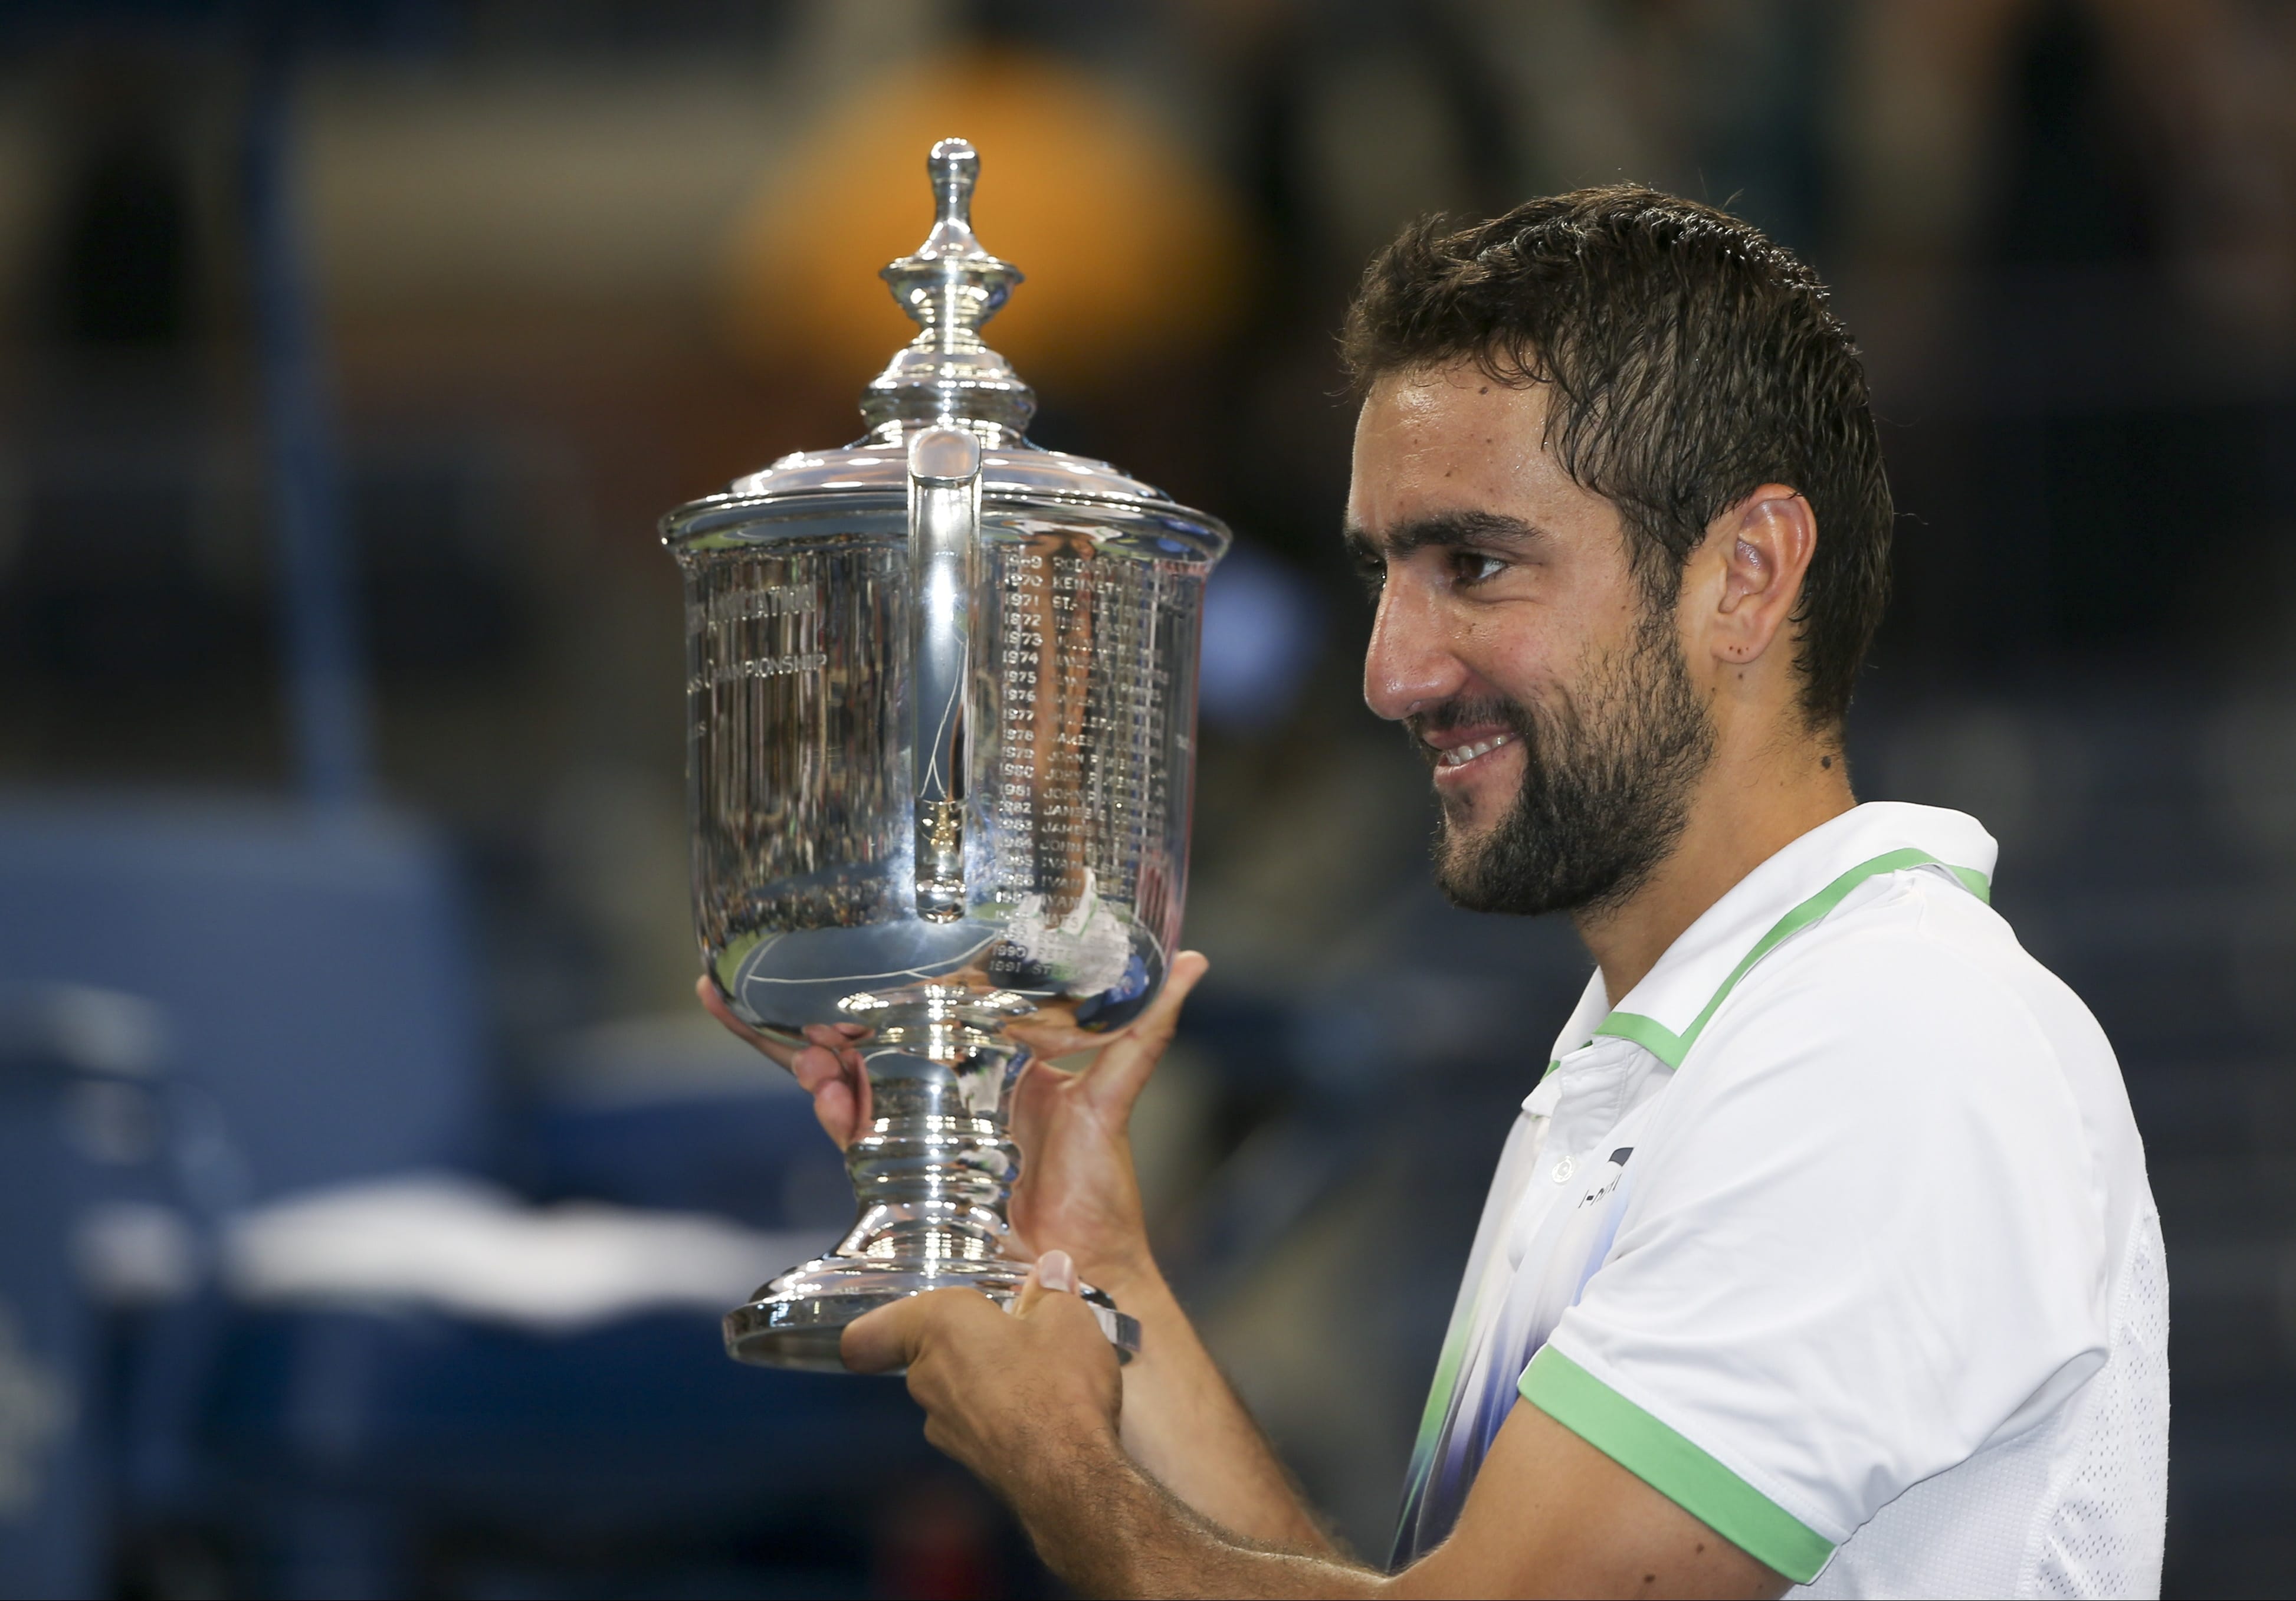 Marin Cilic, of Croatia, holds up the championship trophy after defeating Kei Nishikori, of Japan, in the championship match of the 2014 U.S. Open tennis tournament, Monday, Sept. 8, 2014, in New York.